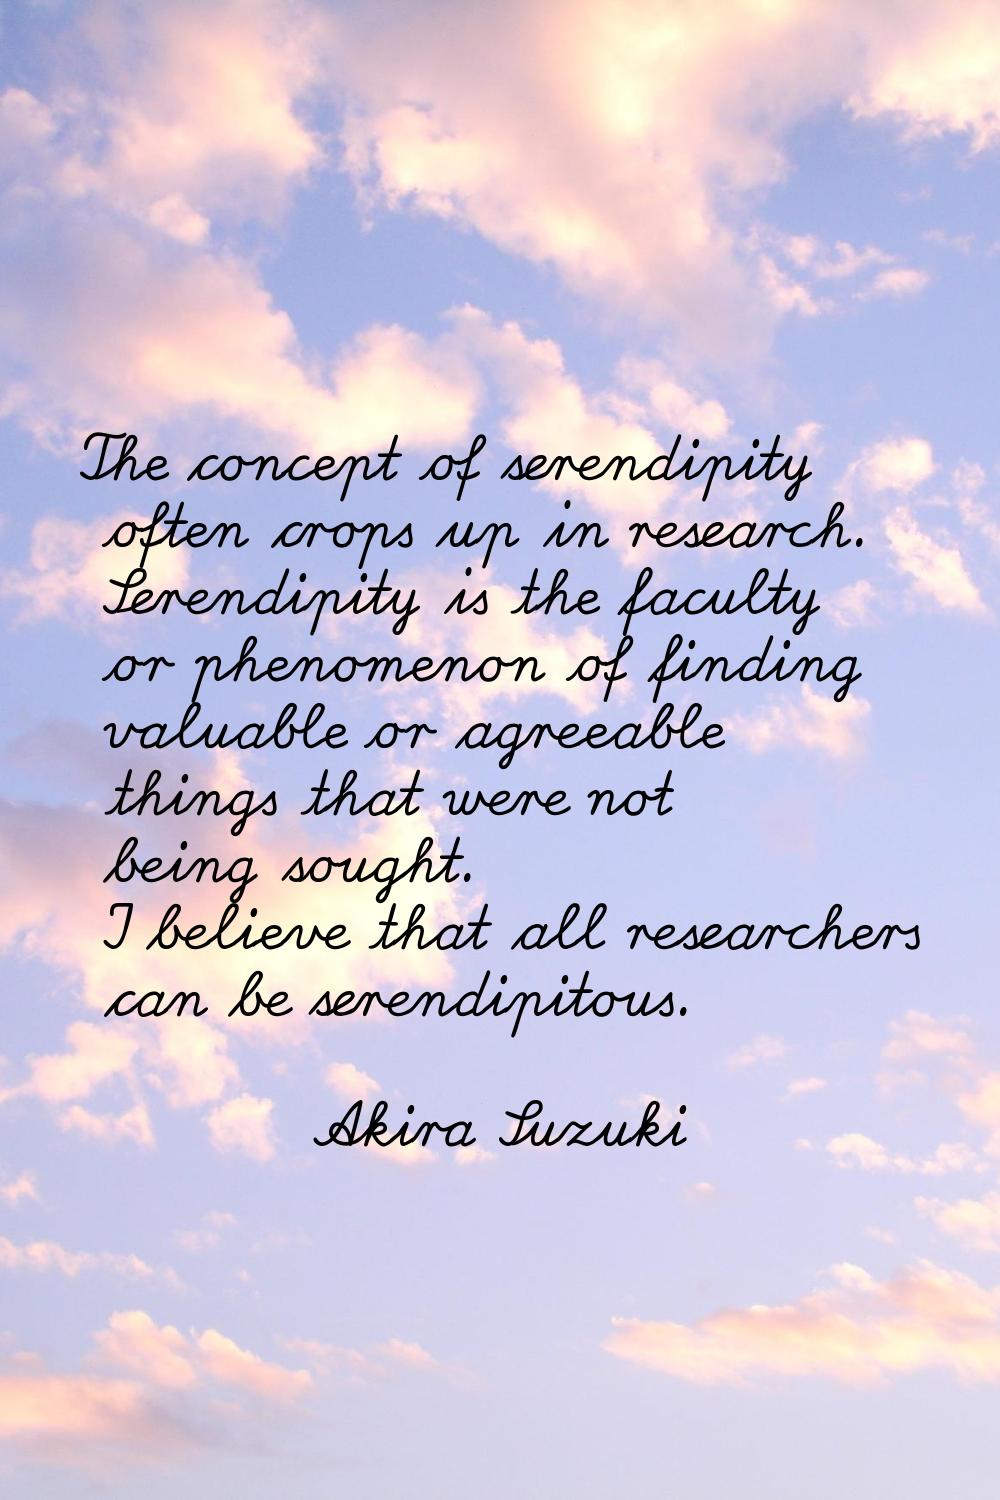 The concept of serendipity often crops up in research. Serendipity is the faculty or phenomenon of 